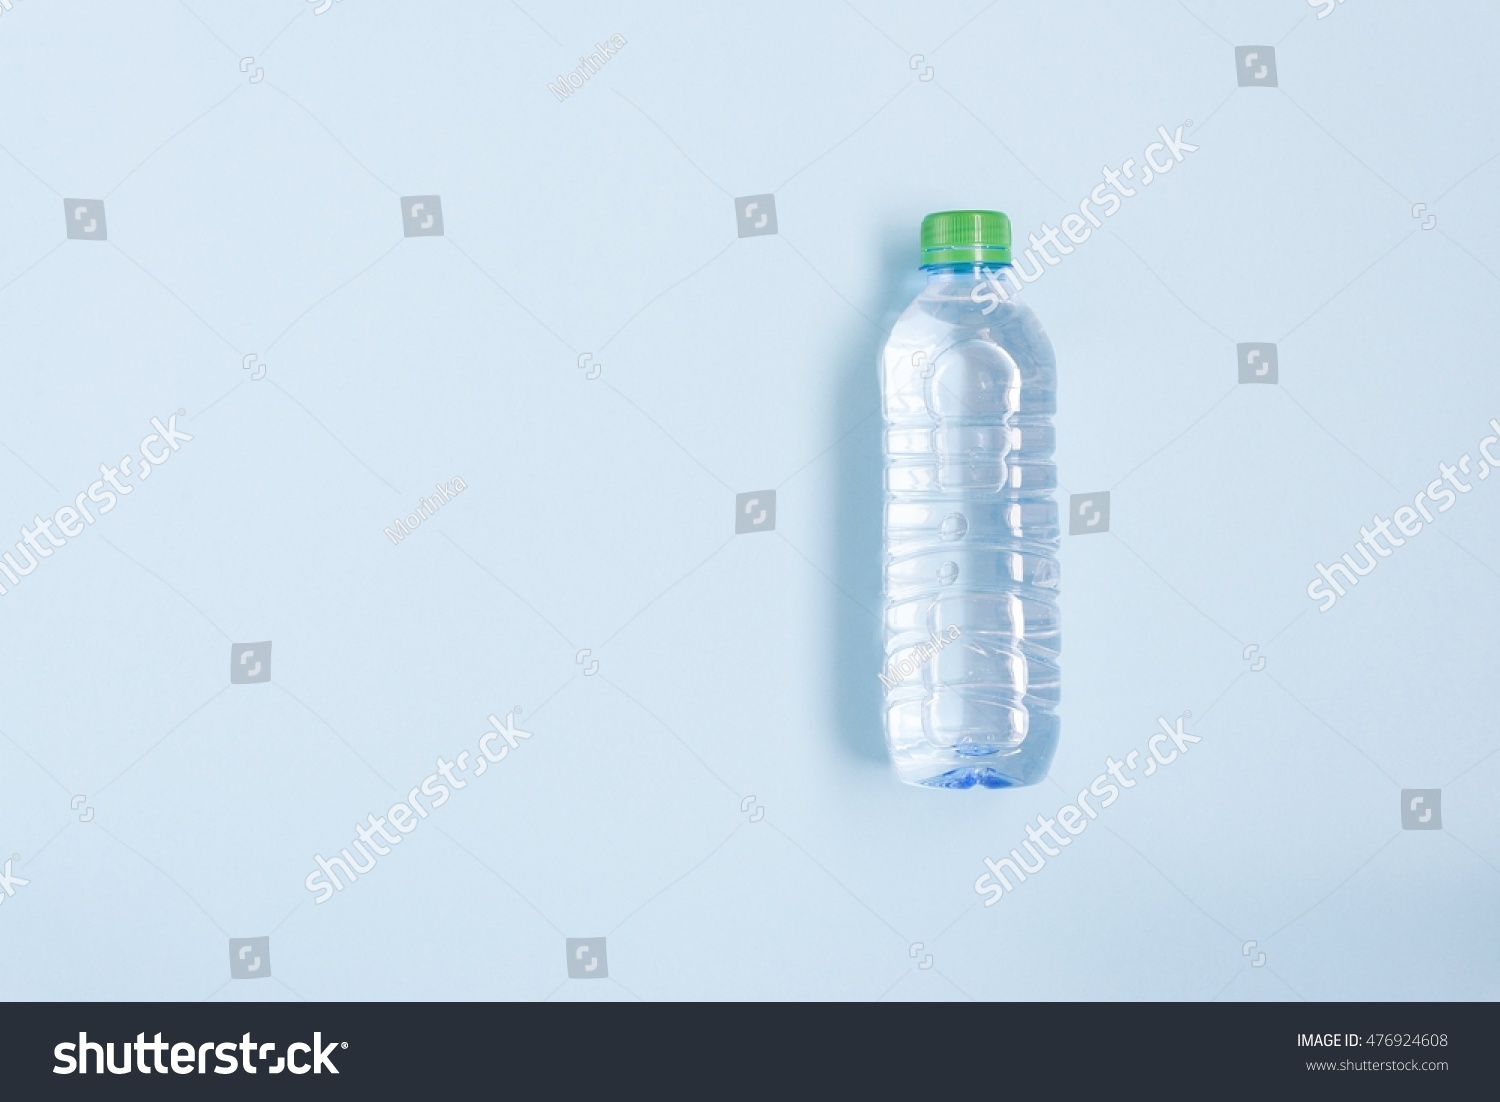 Bottle with clean water over blue background, top view #476924608